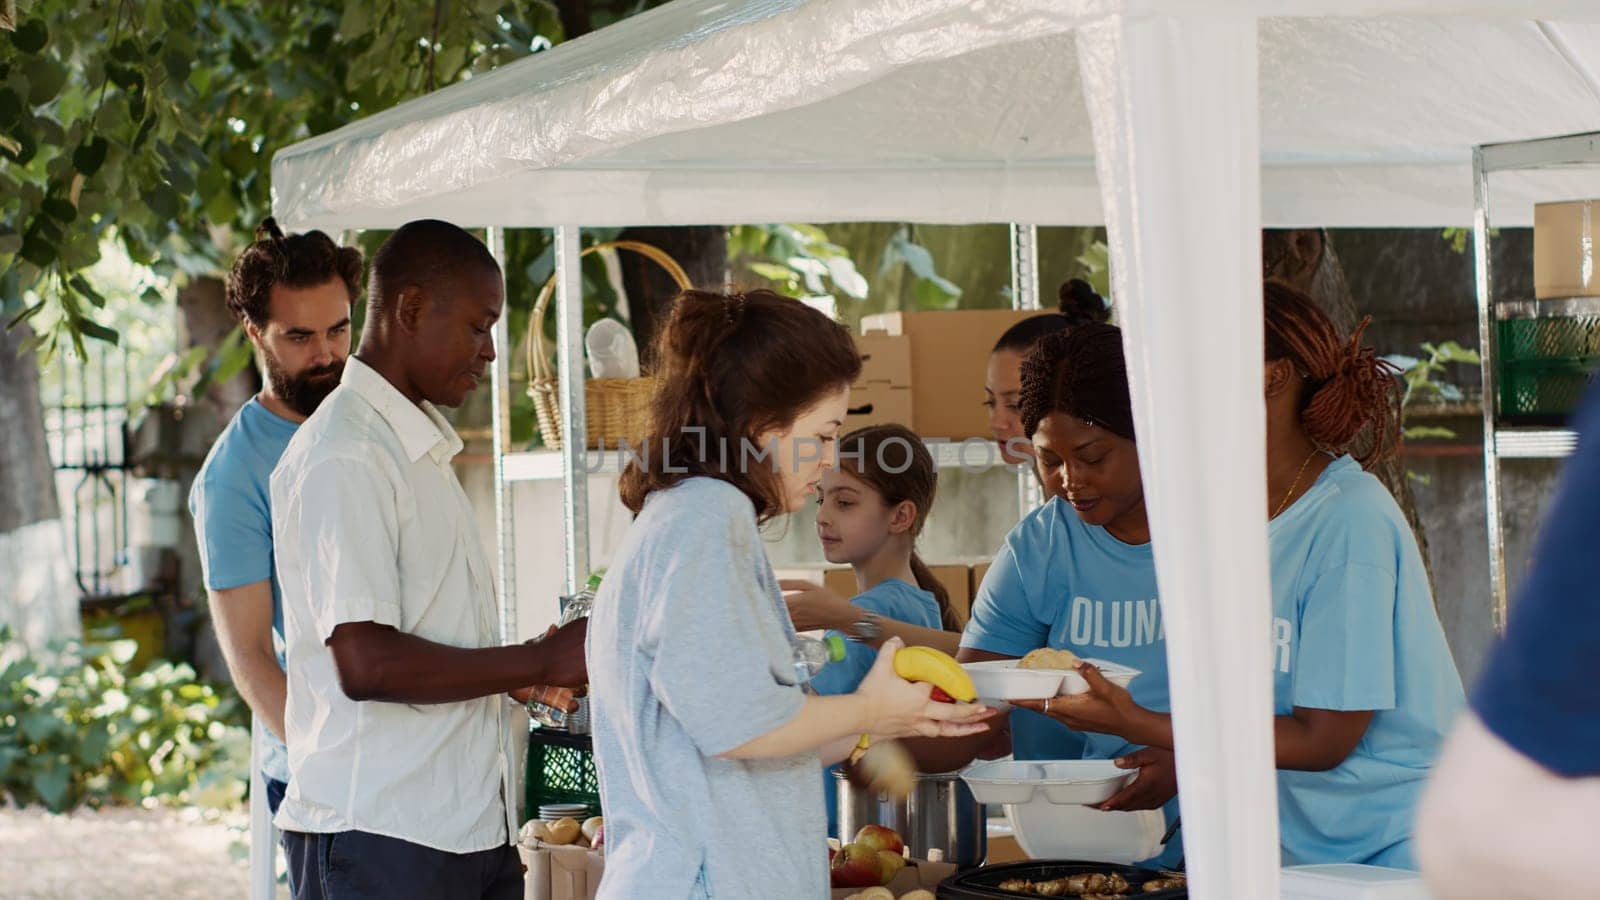 Charity workers distribute free meals by DCStudio